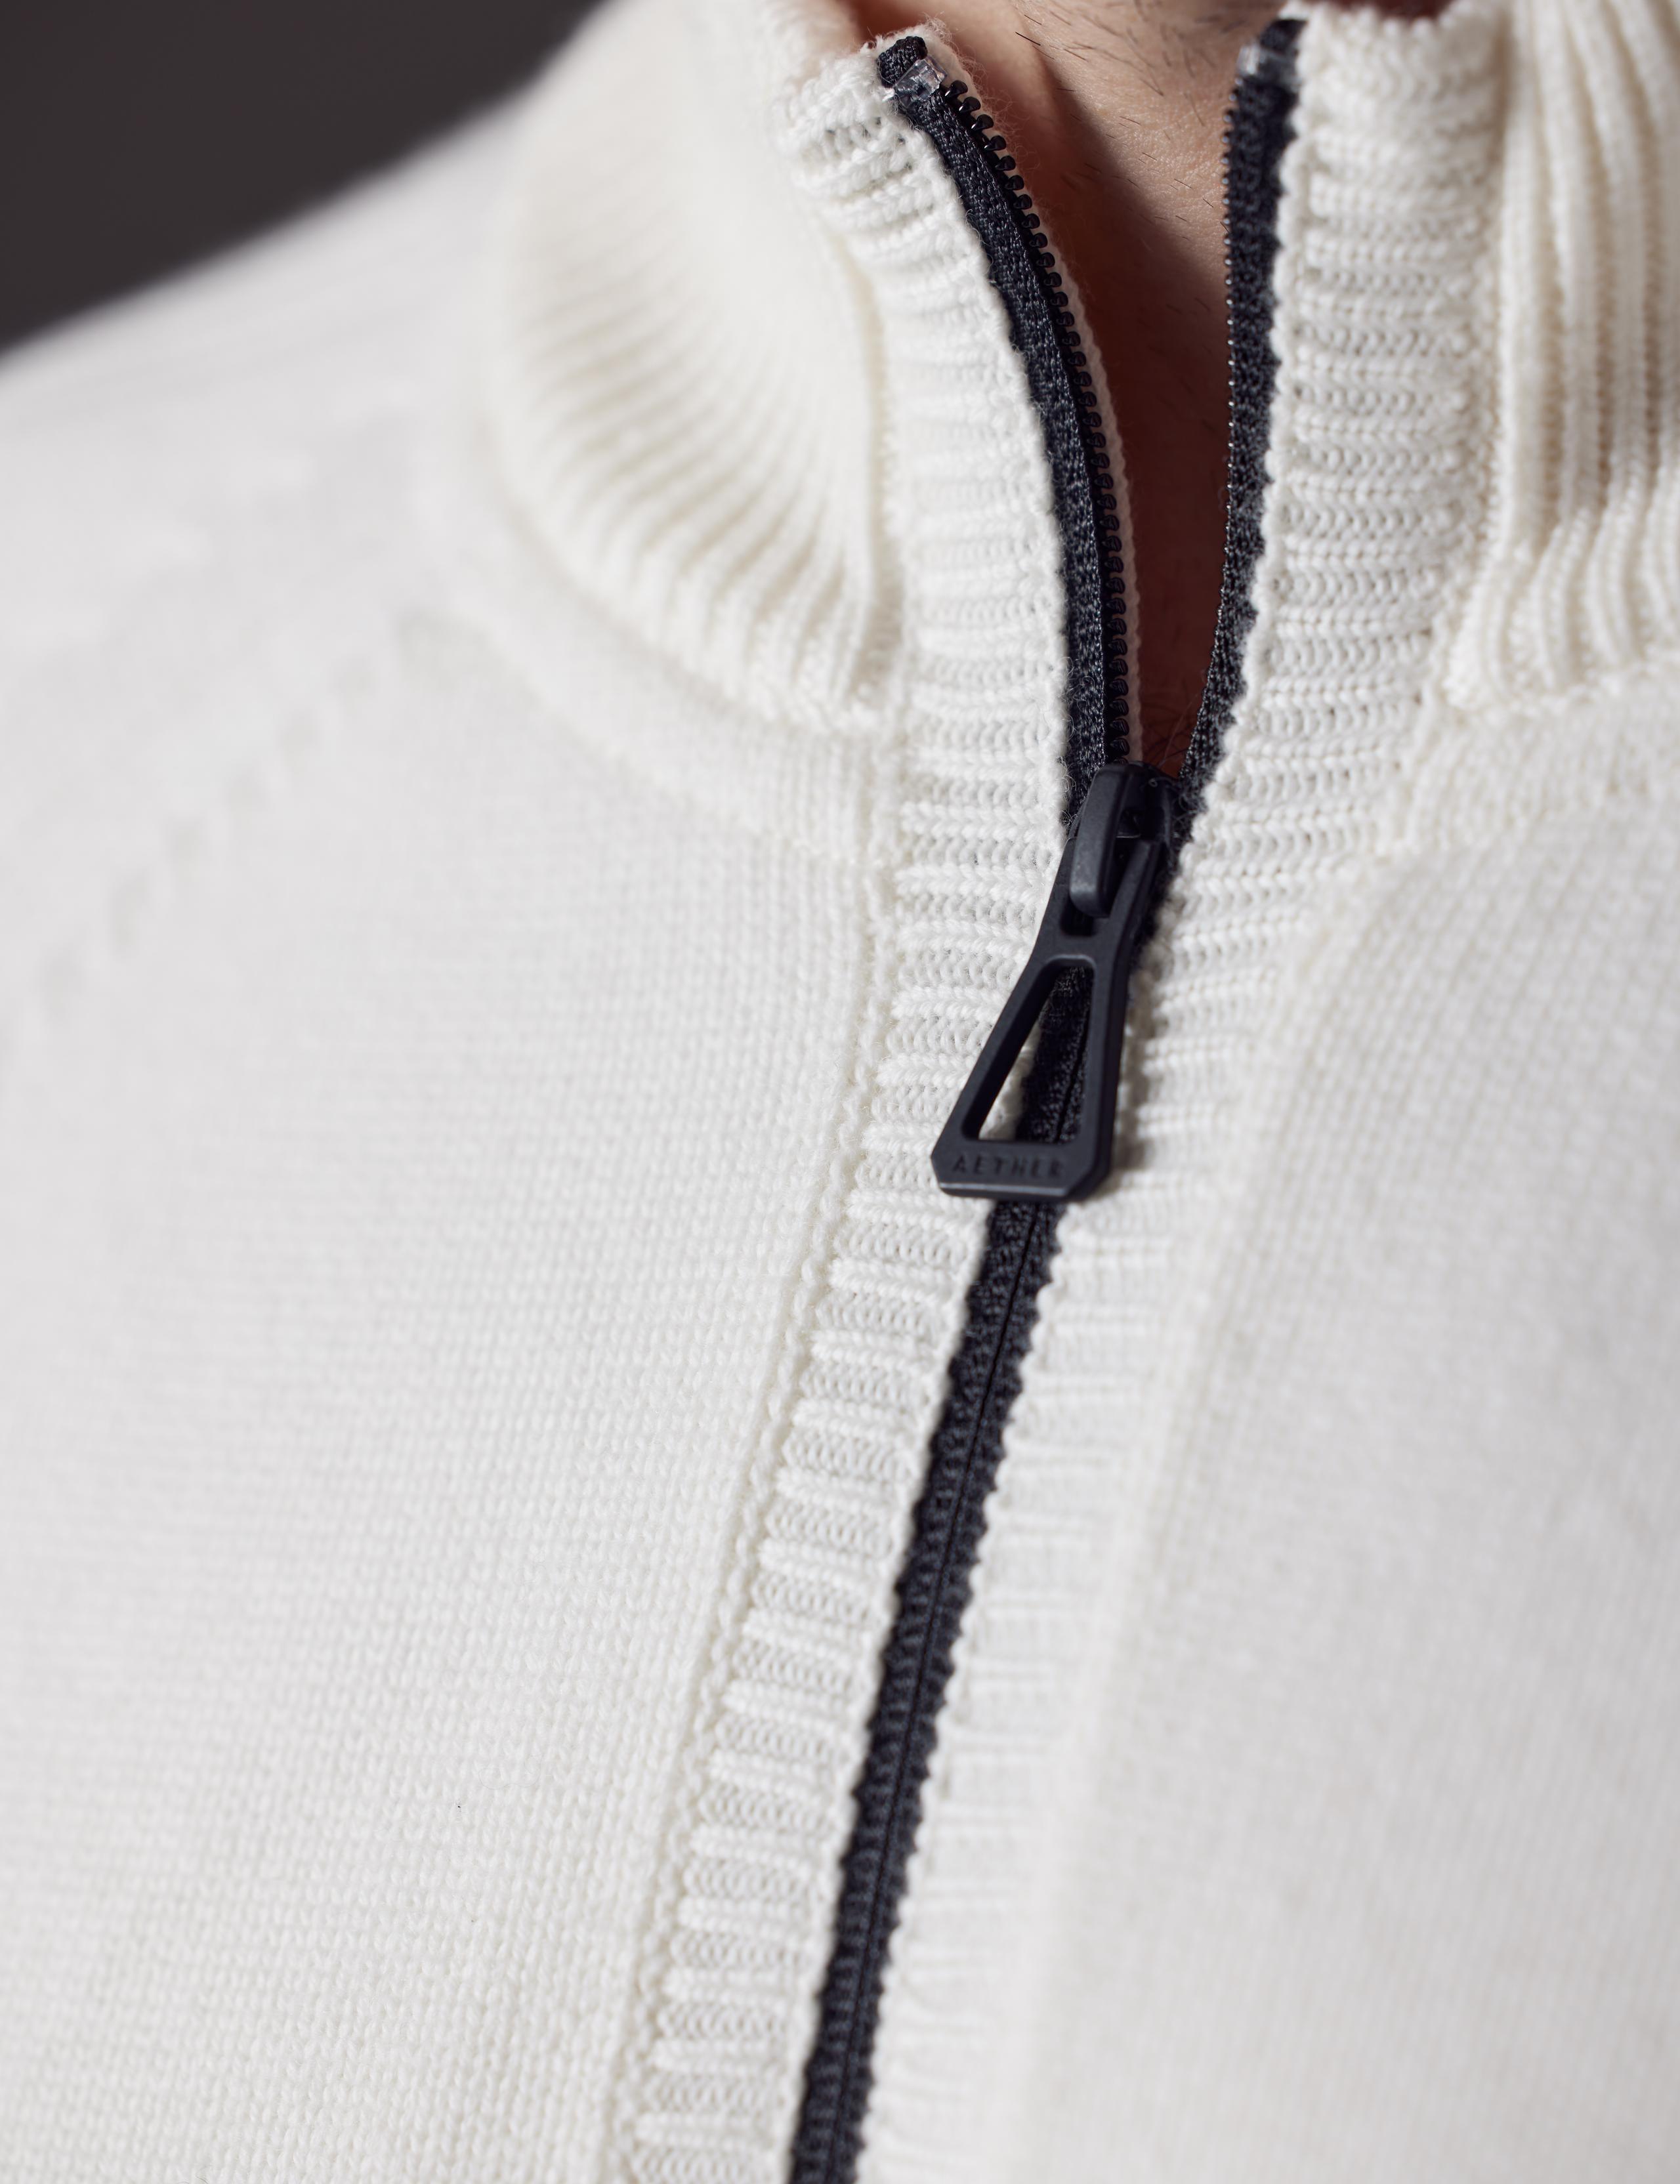 AETHER Defender and Detailed shot of the Riley Full-Zip Sweater.